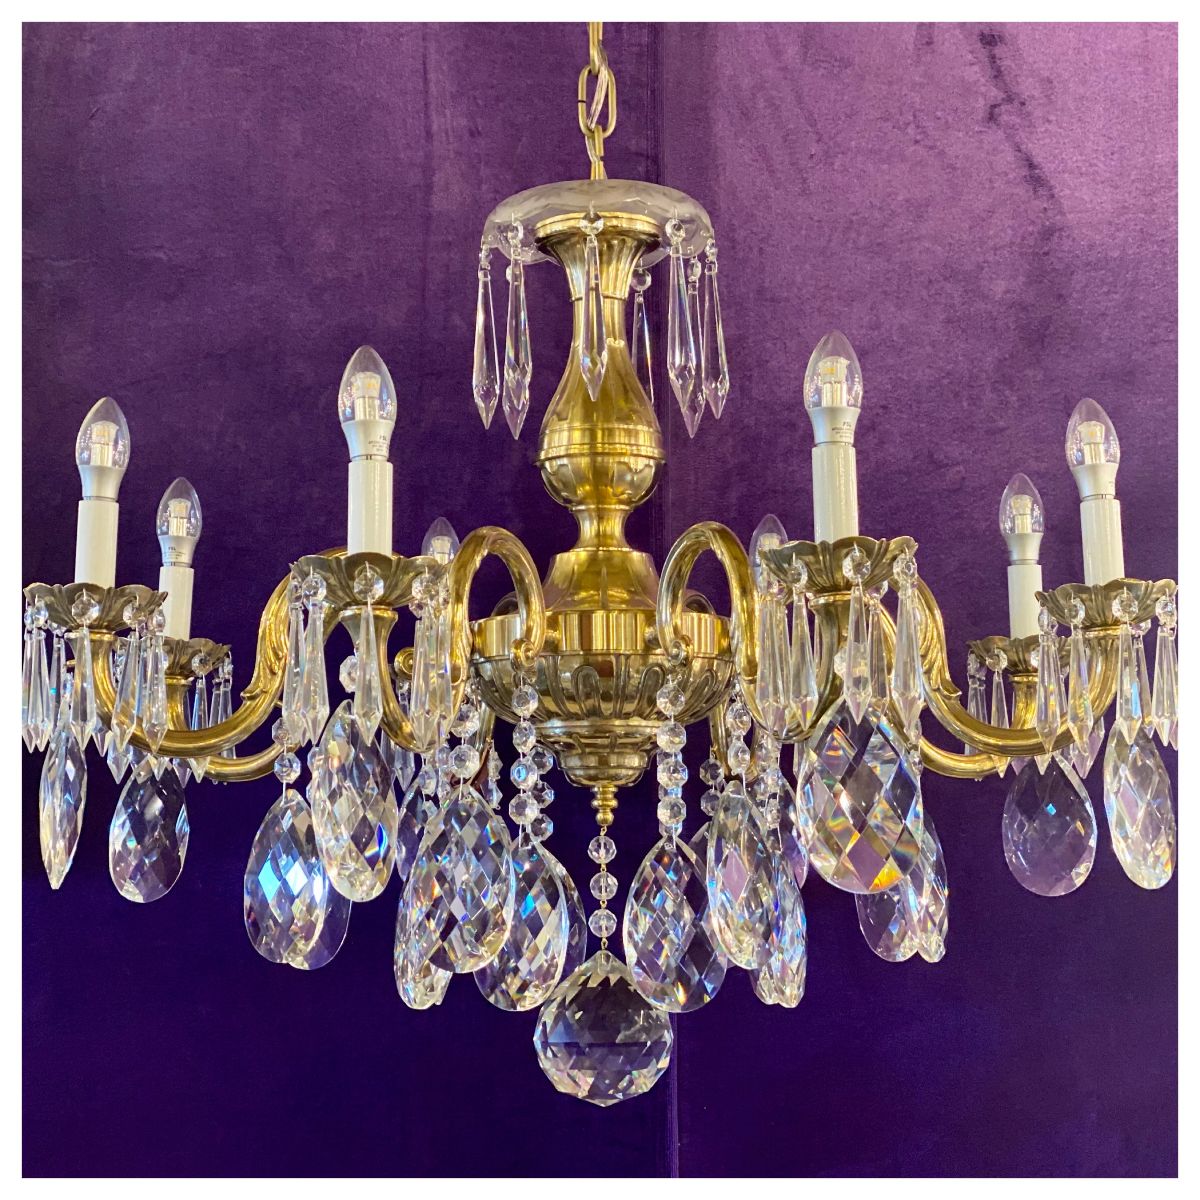 An Antique Polished Brass Chandelier with Crystal